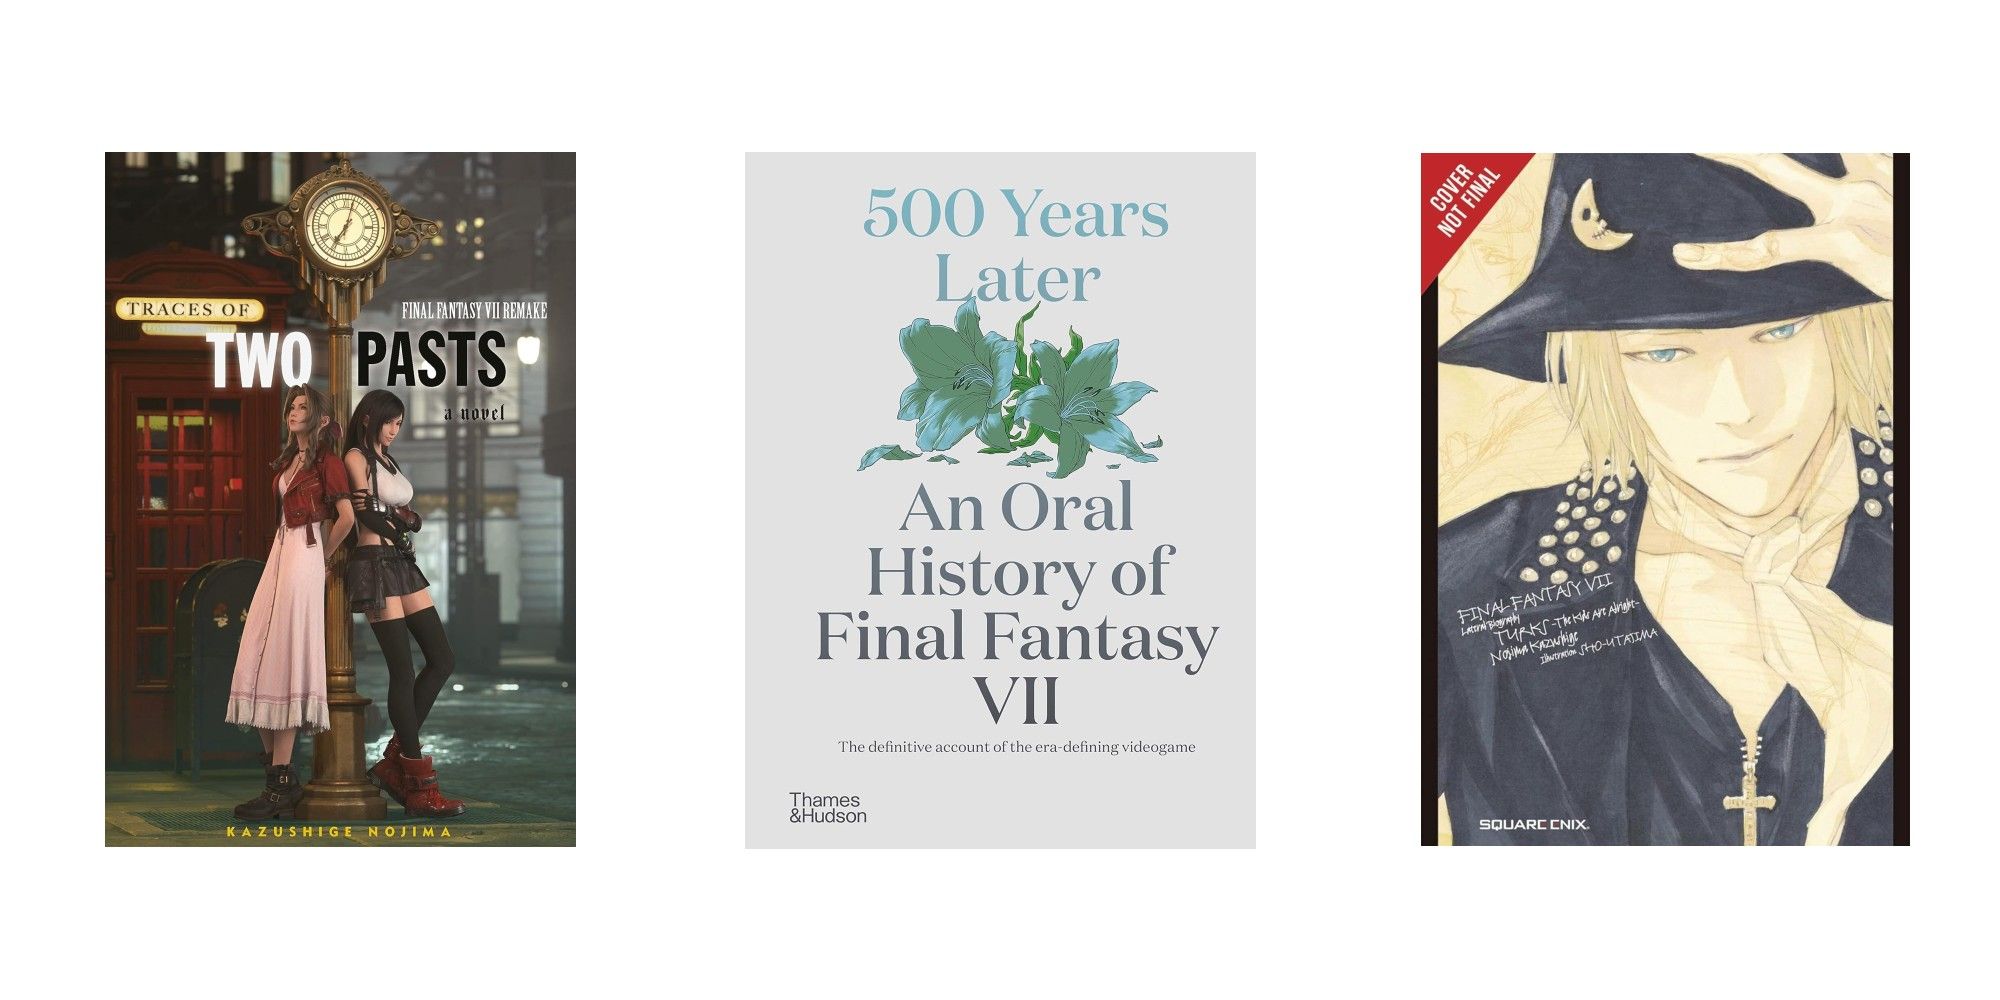 Article header image with the covers of 500 Years Later: An Oral History of Final Fantasy VII, Traces of Two Pasts, and The Kids Are Alrigh